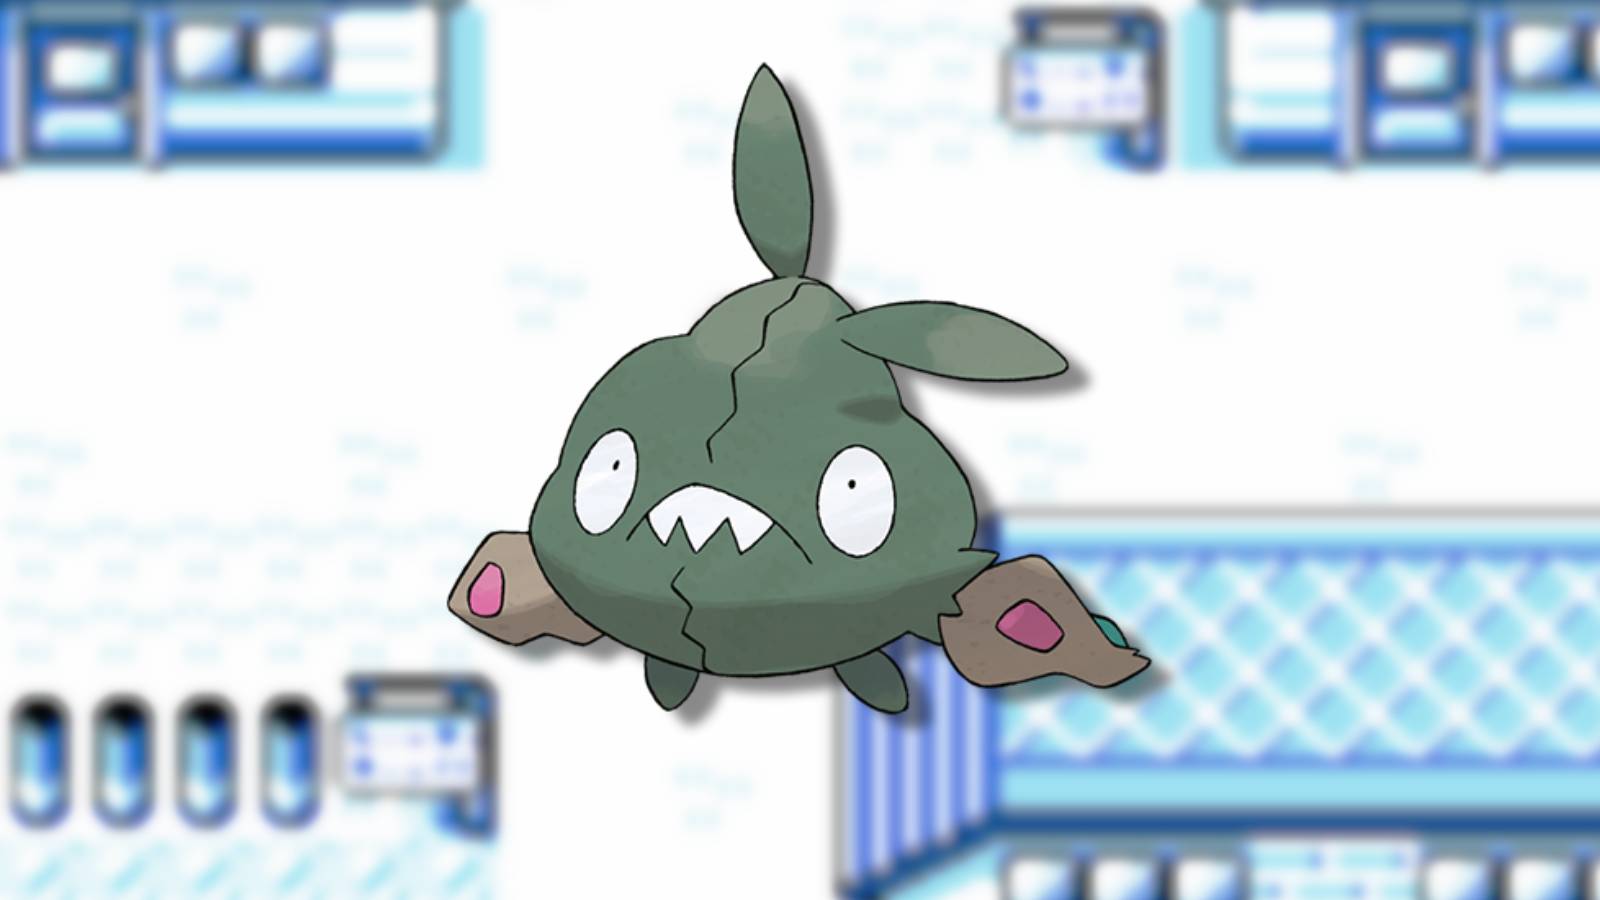 The Pokemon Trubbish appears against a blurred background